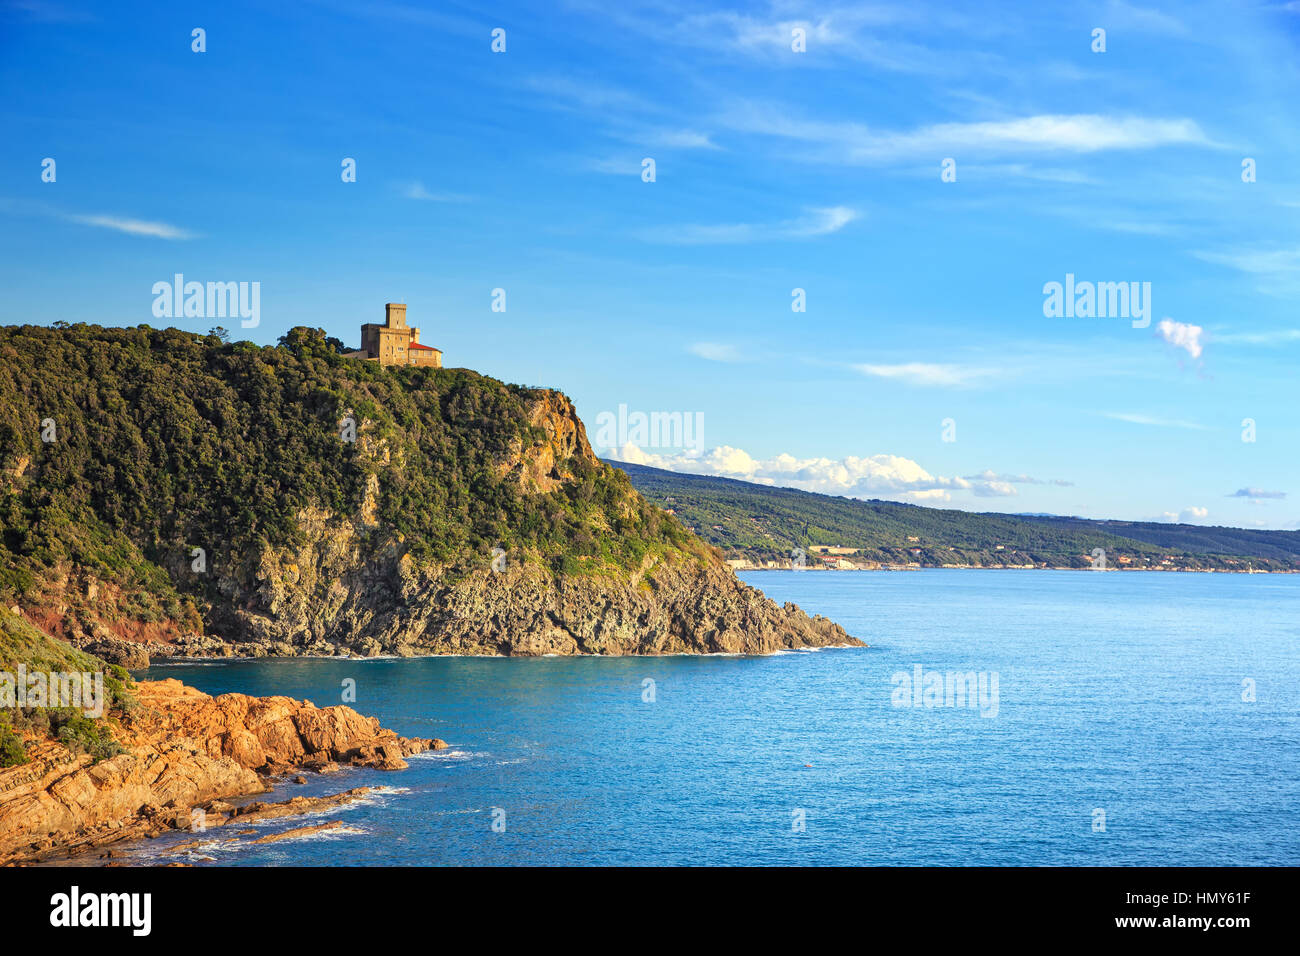 Cliff rock and building on the sea on sunset. Quercianella, Tuscany riviera, Italy, Europe. Stock Photo